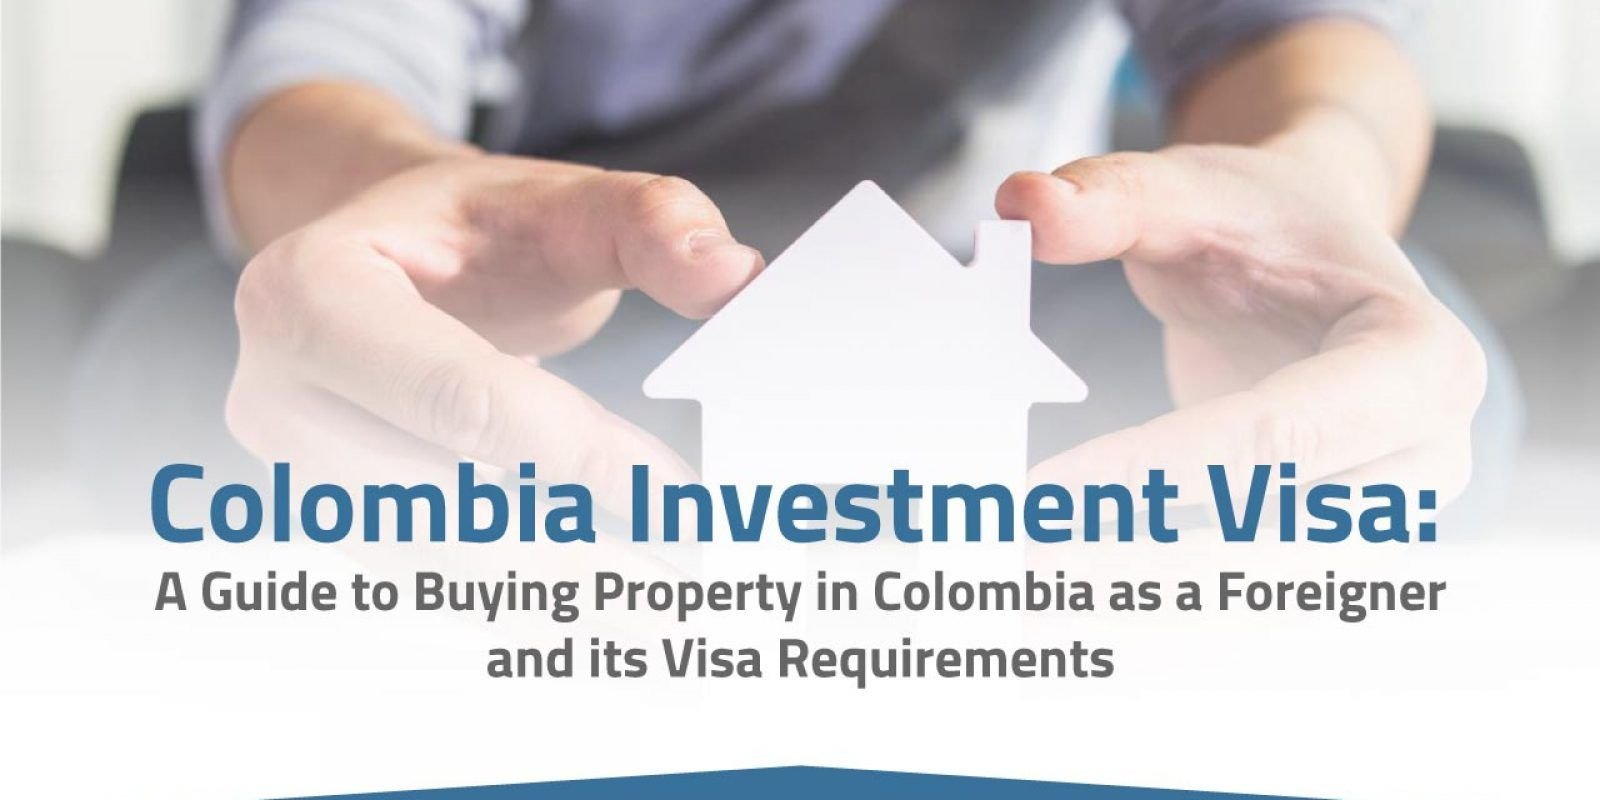 Real Estate - Colombia Investment Visa